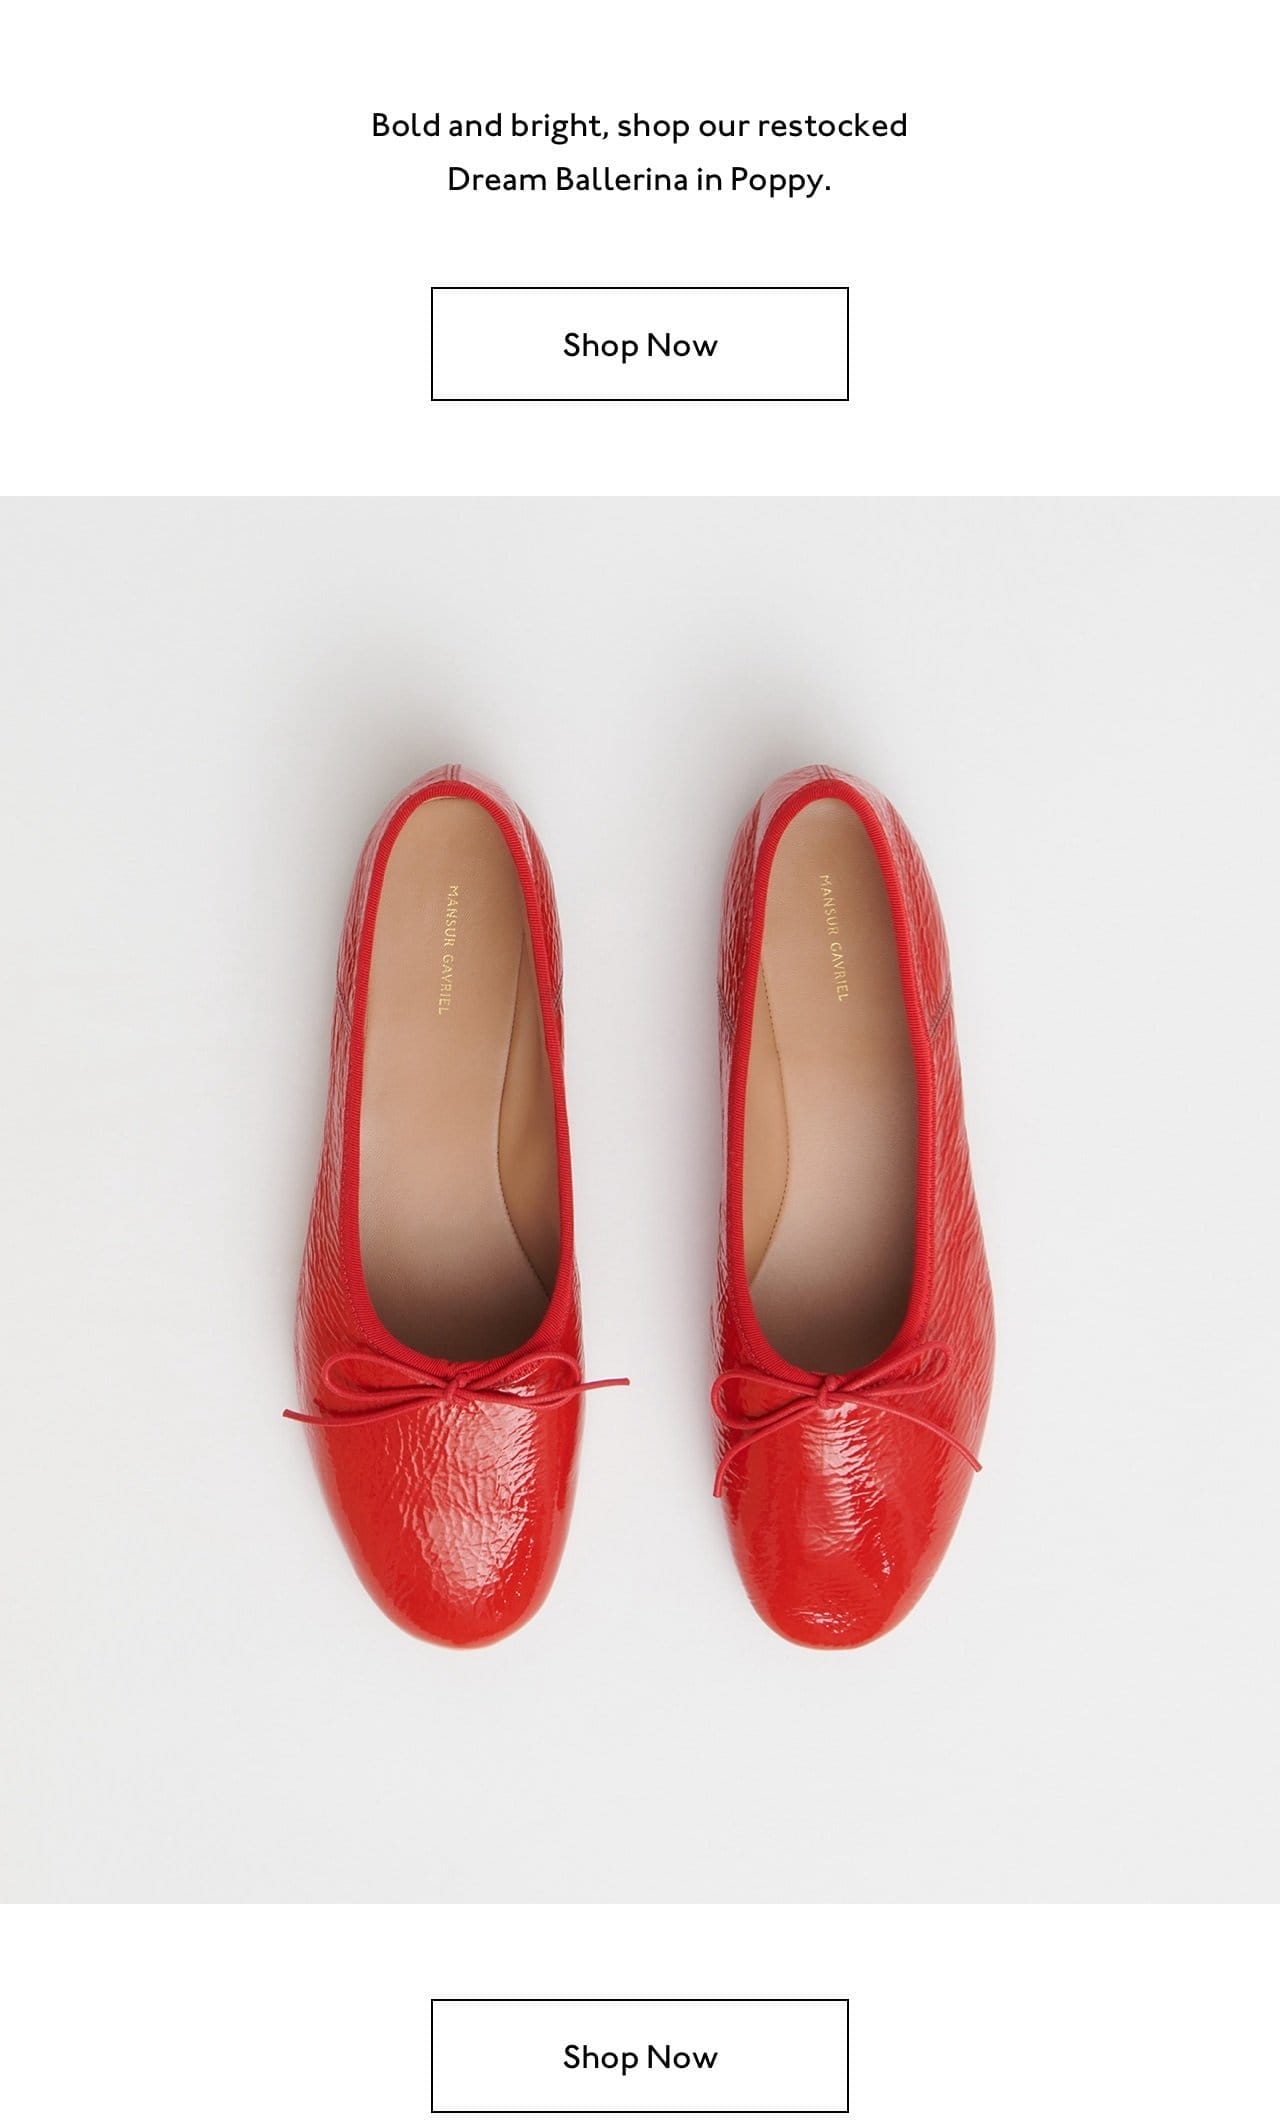 Bold and bright, shop our restocked Dream Ballerina in Poppy.